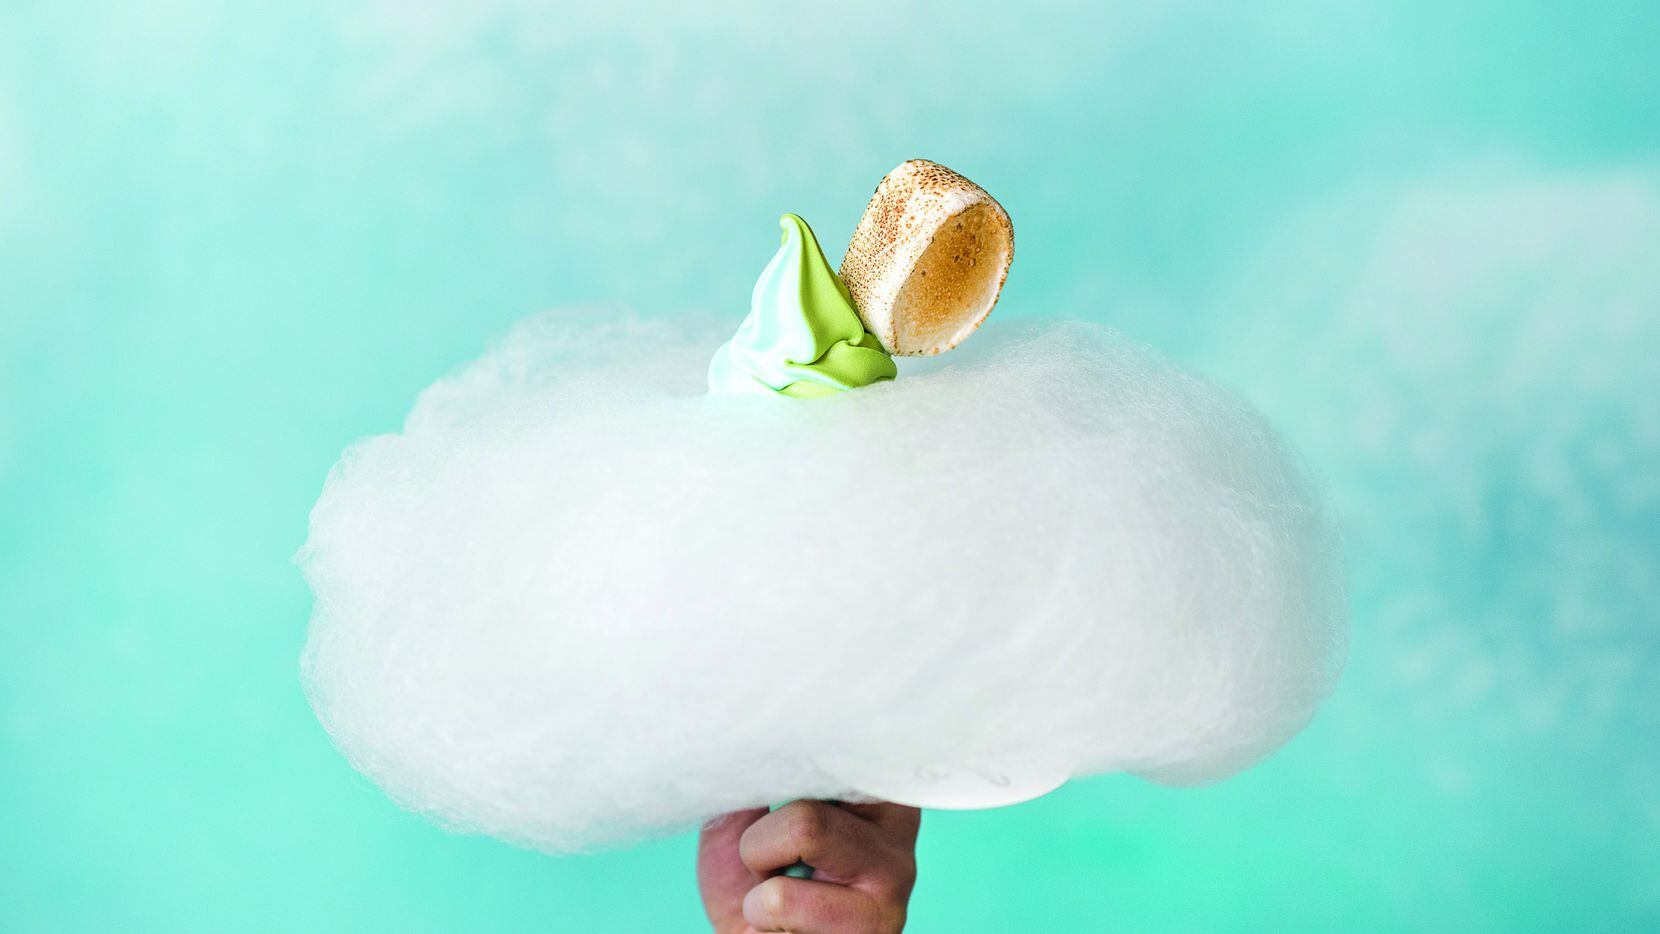 At Aqua S in Victory Park, you can get ice cream that is served on a cloud of hand spun...